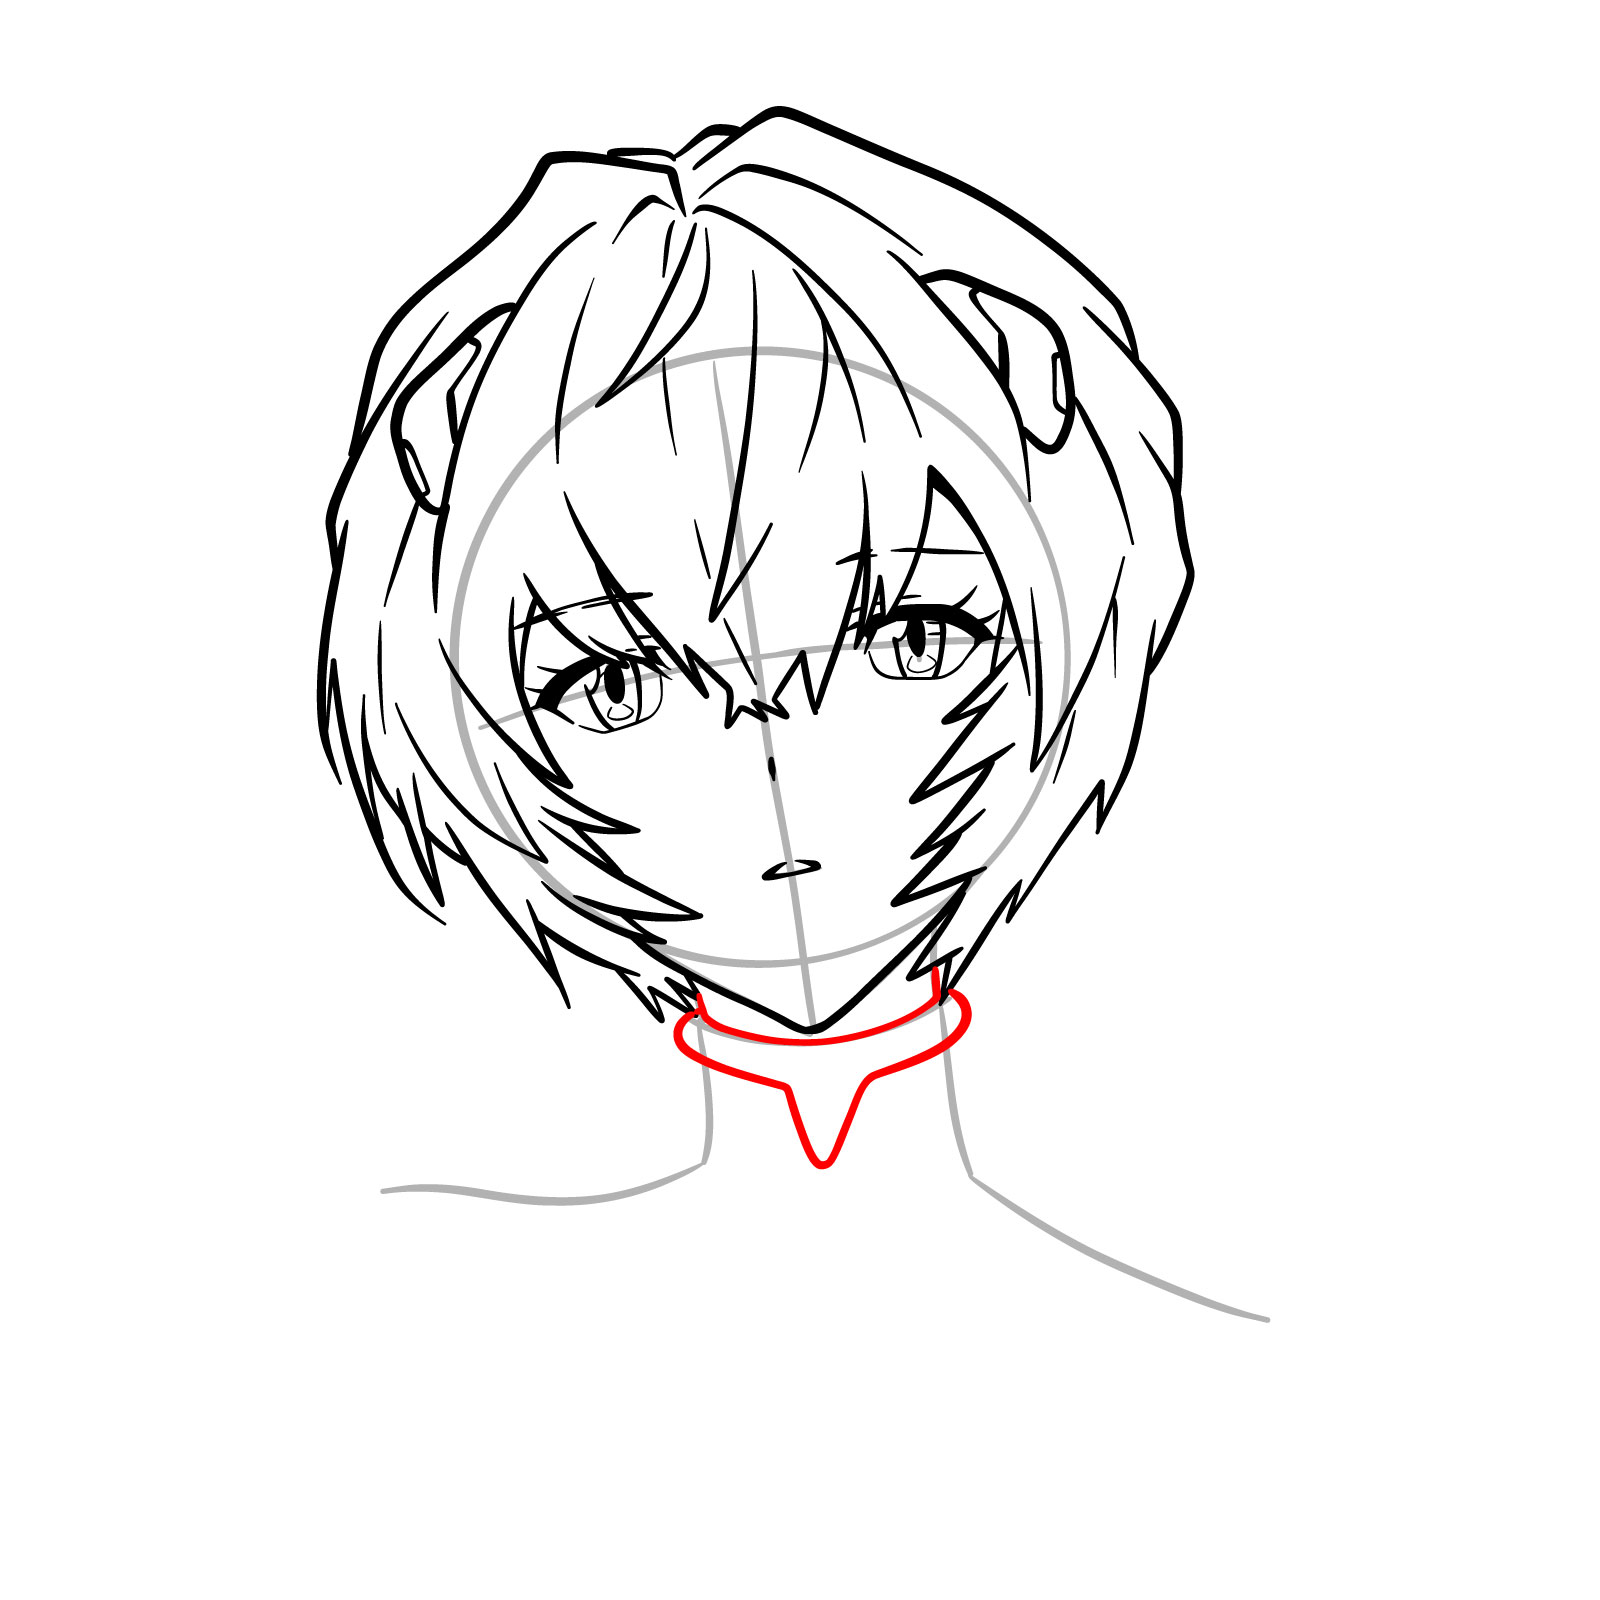 How to draw Rei Ayanami's face - Evangelion - step 17